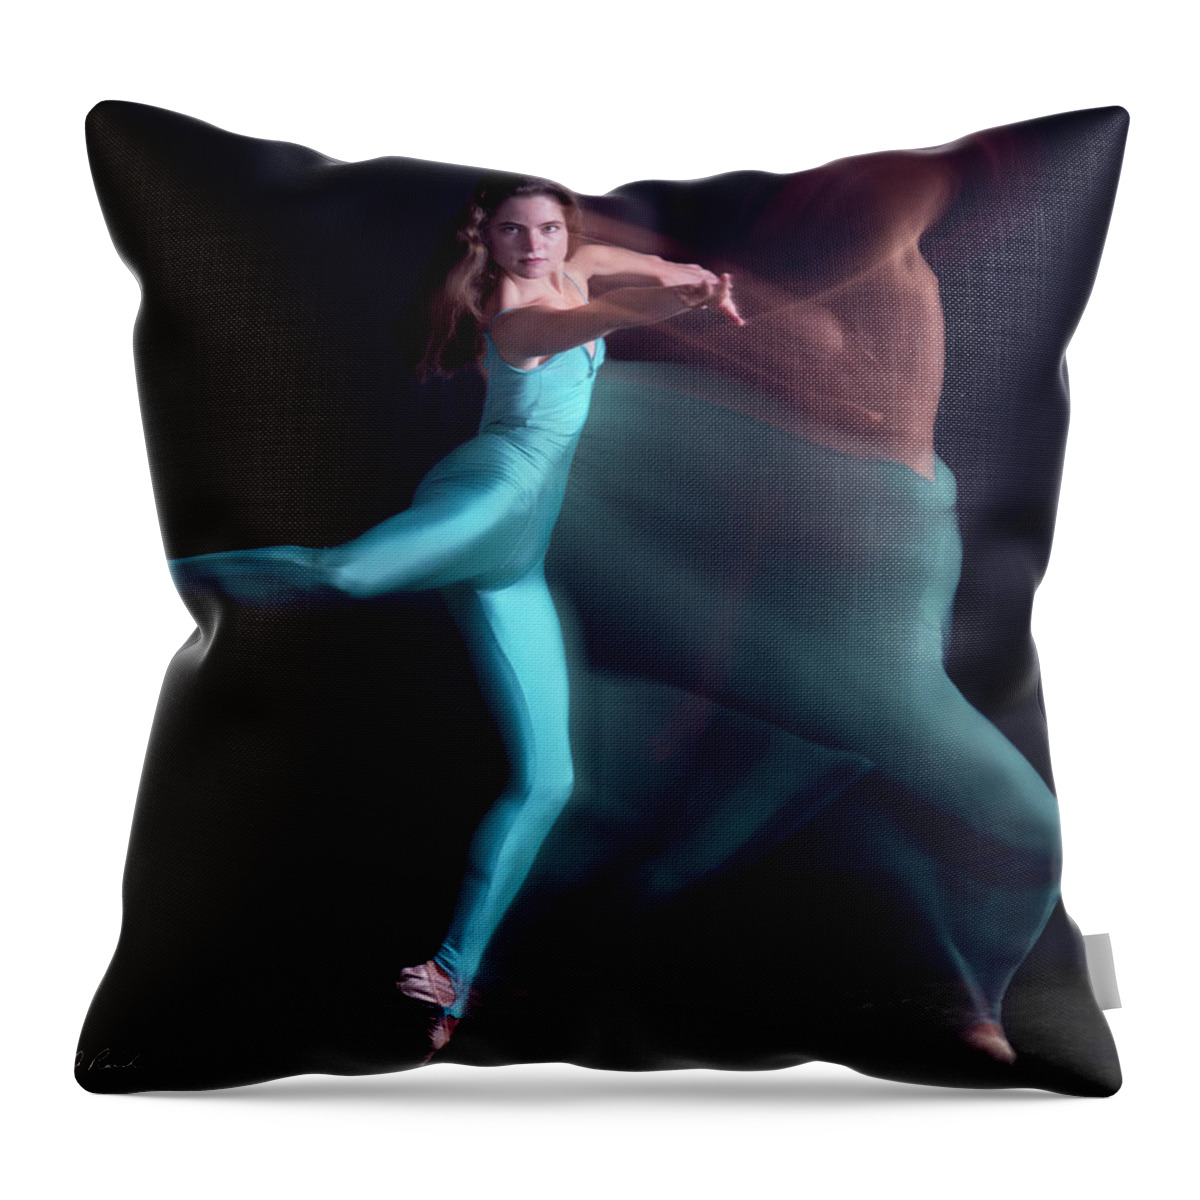 Photography Throw Pillow featuring the photograph On Point by Frederic A Reinecke